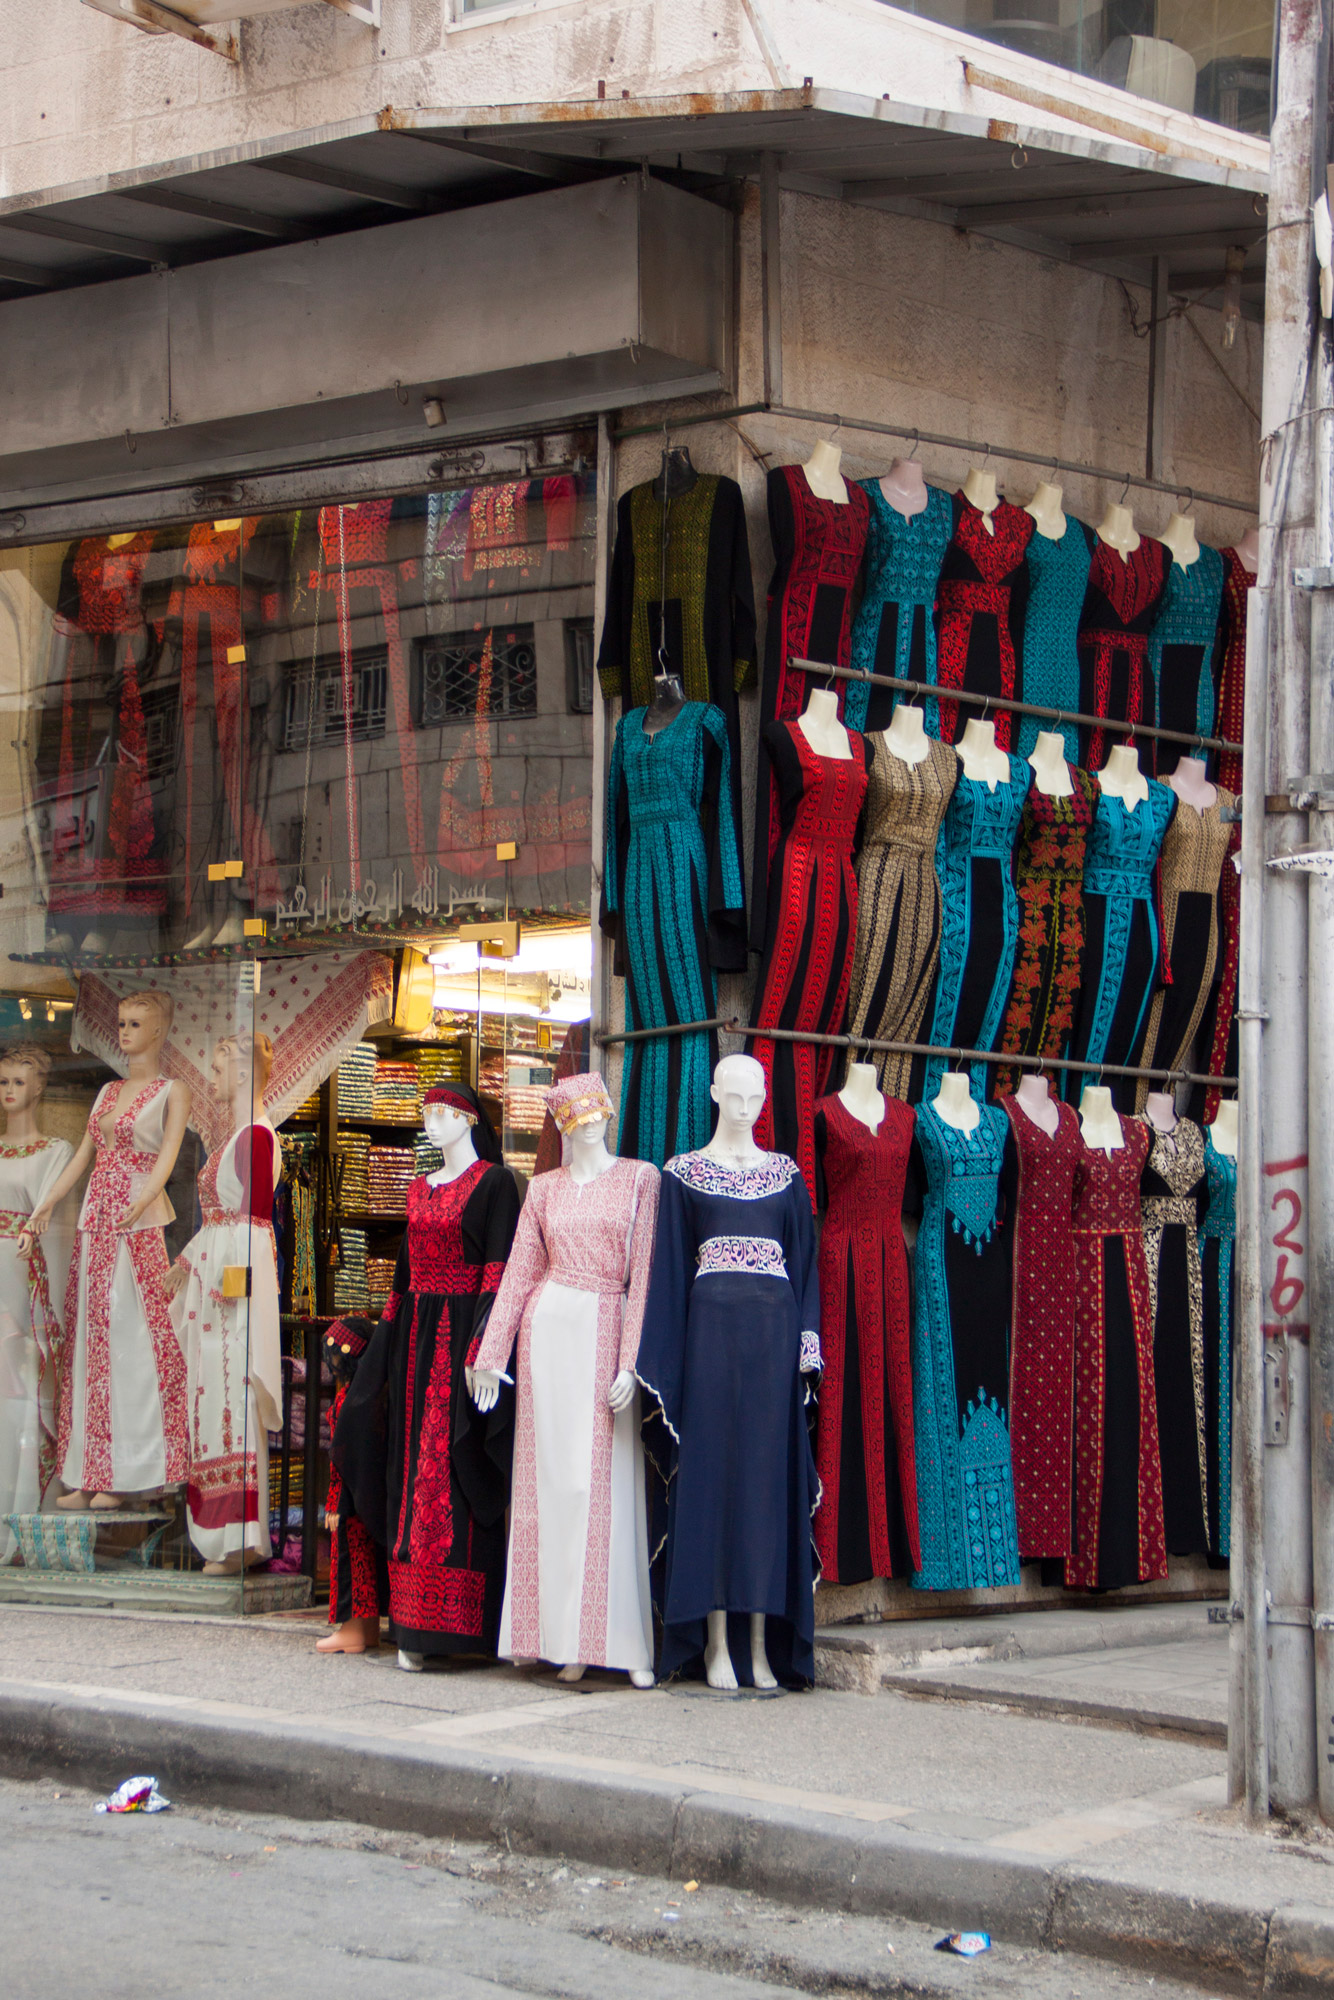 There are a lot of stores selling traditional costumes. Jordanian costumes are long cut, embroidered, and have a scoop neckline.